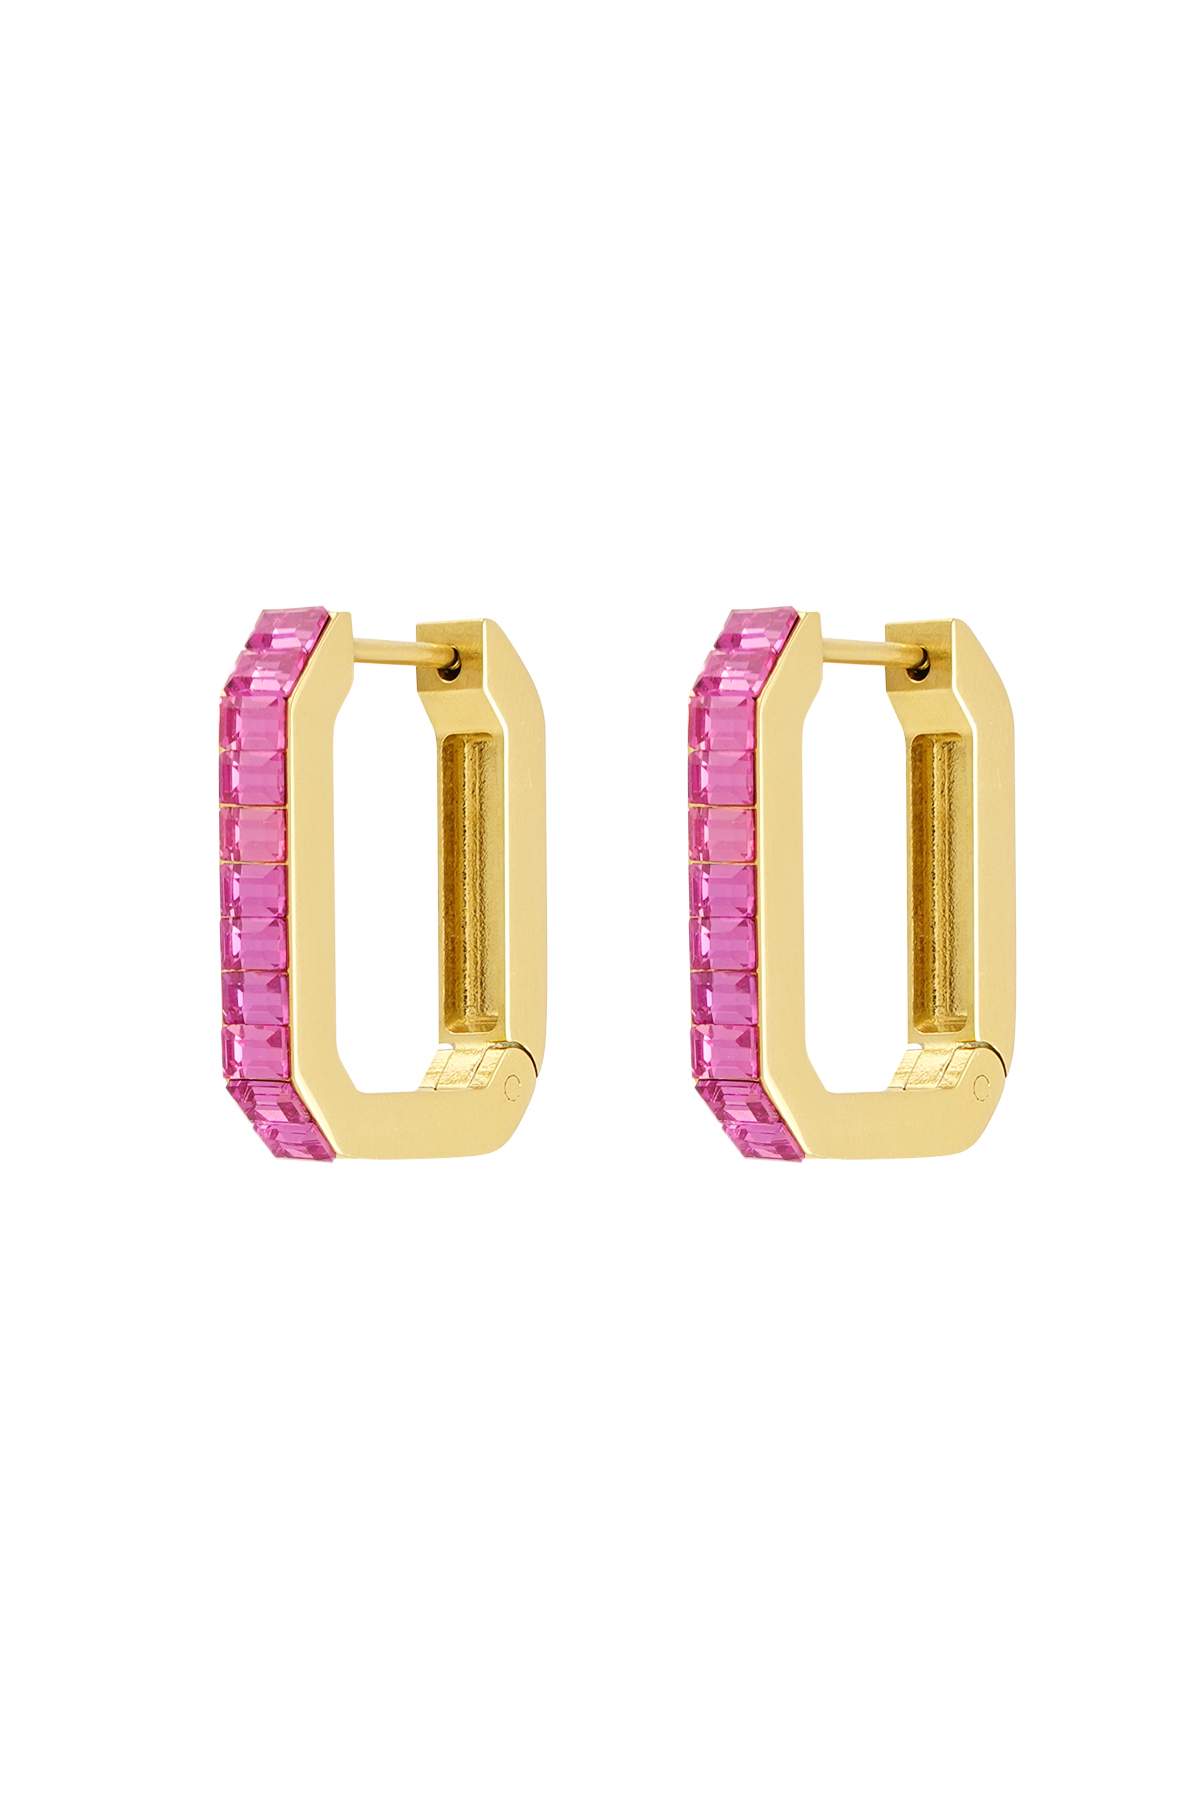 Earrings elongated stones - gold/pink h5 